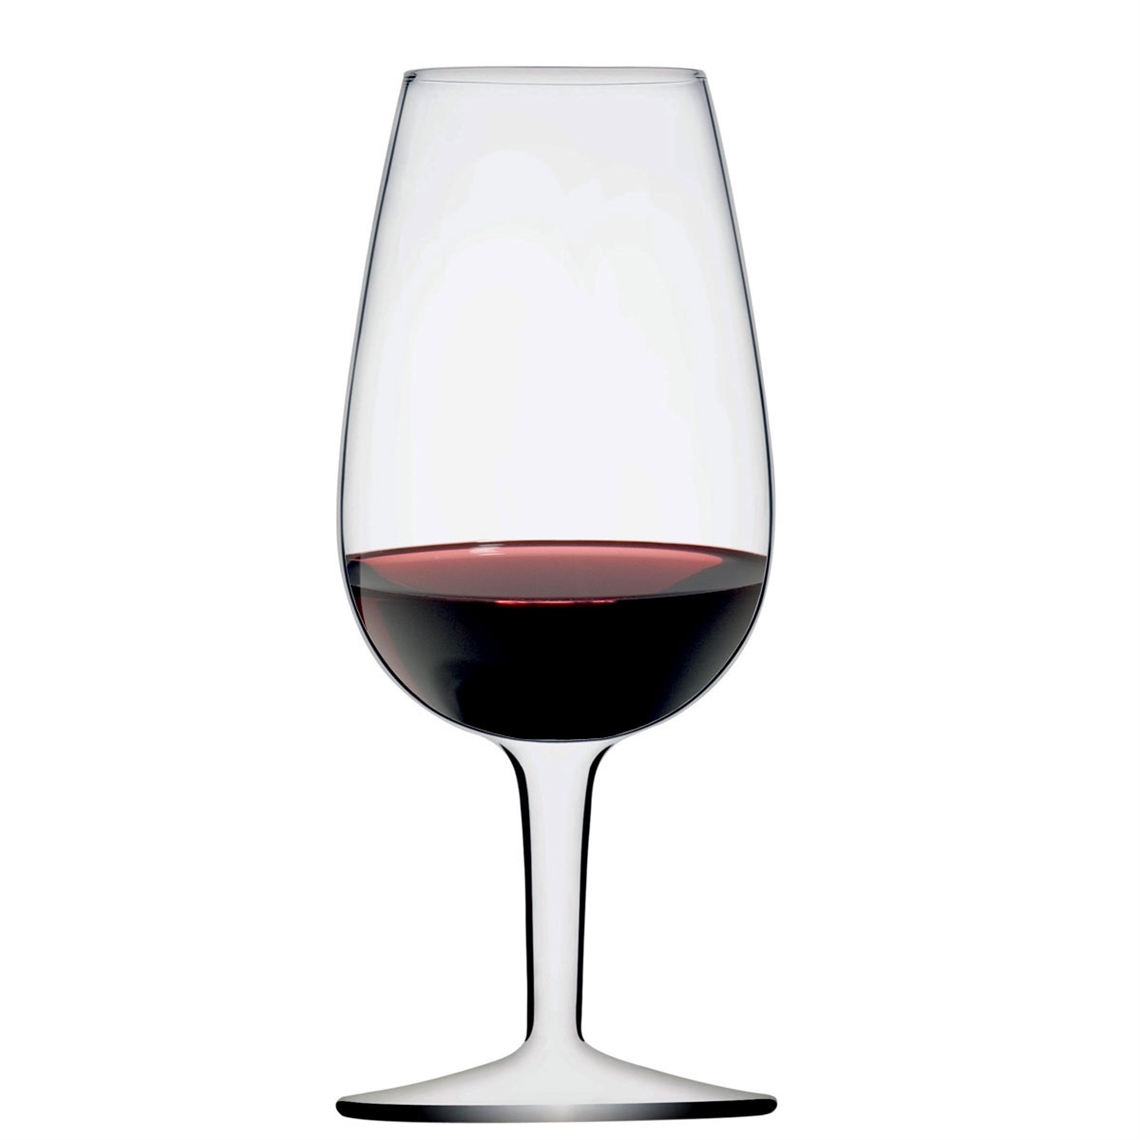 View more what are the best appetisers to serve at a wine tasting party? from our Wine Tasting Glasses range